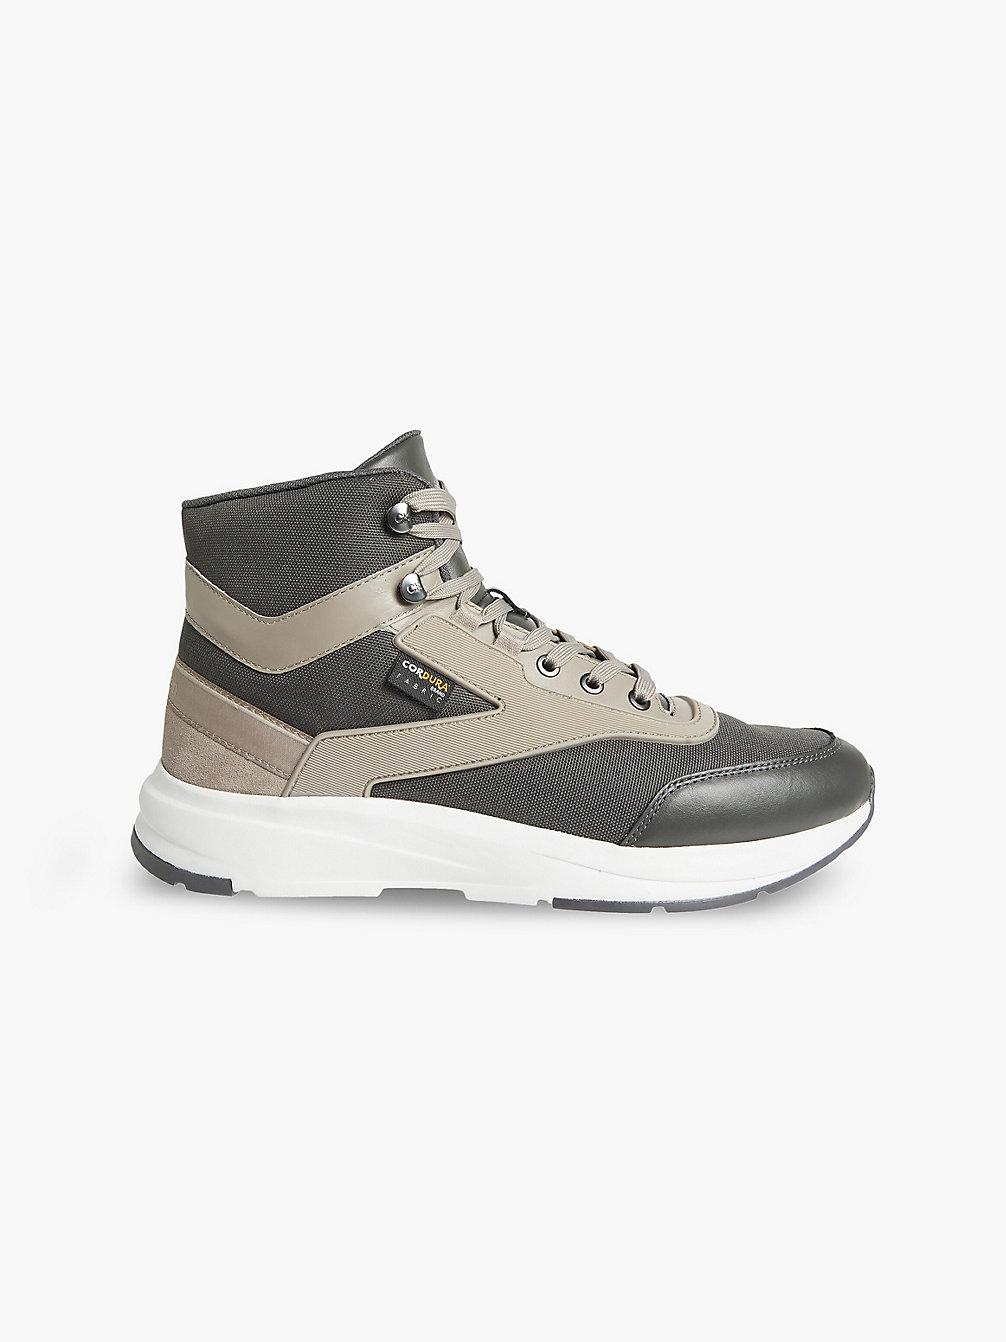 MEDIUM CHARCOAL/SHADOW BEIGE Recycled High-Top Trainers undefined men Calvin Klein